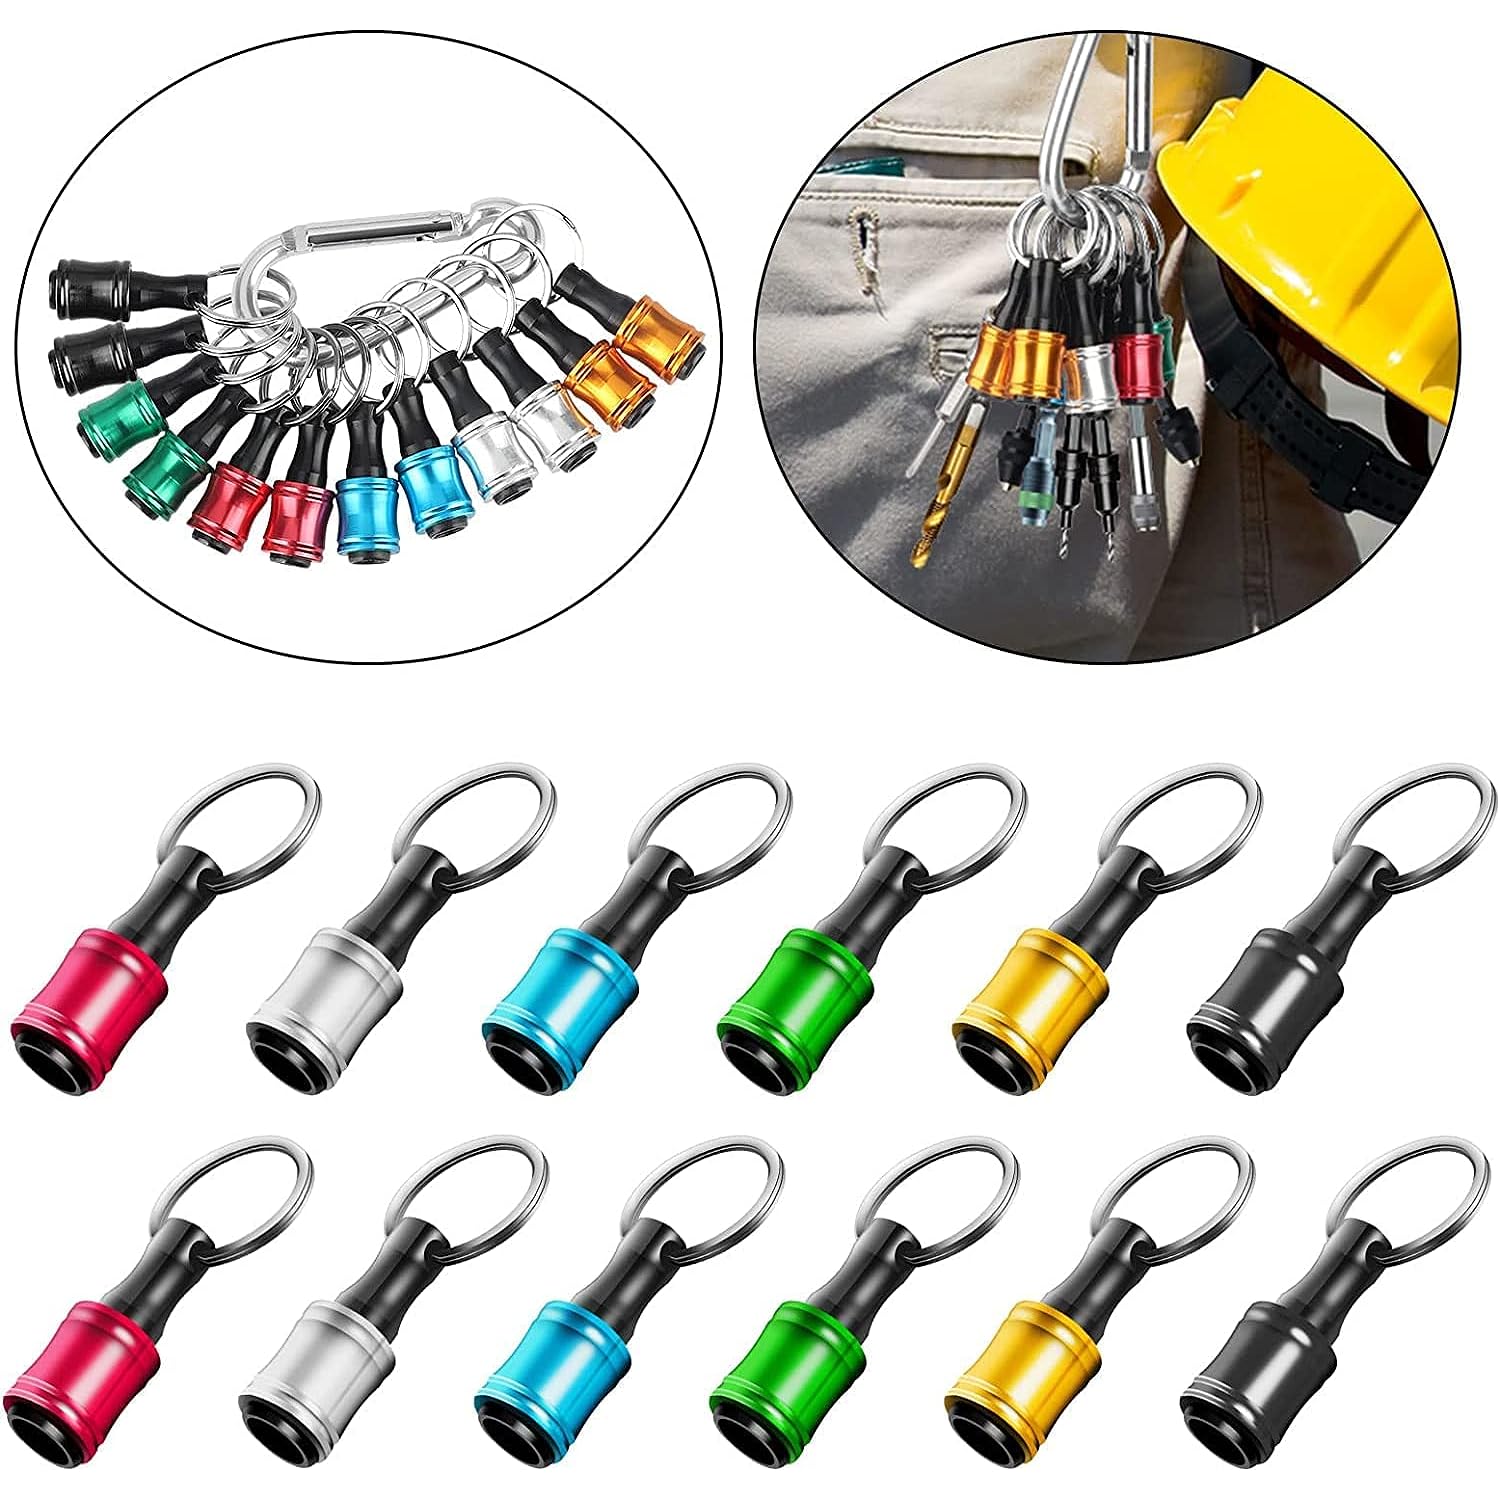 Great Choice Products 12Pcs 1/4 Inch Hex Shank Screwdriver Bits Holder Extension Bar Keychain Screw Adapter Drill Fast Change Portable Hand-Held…